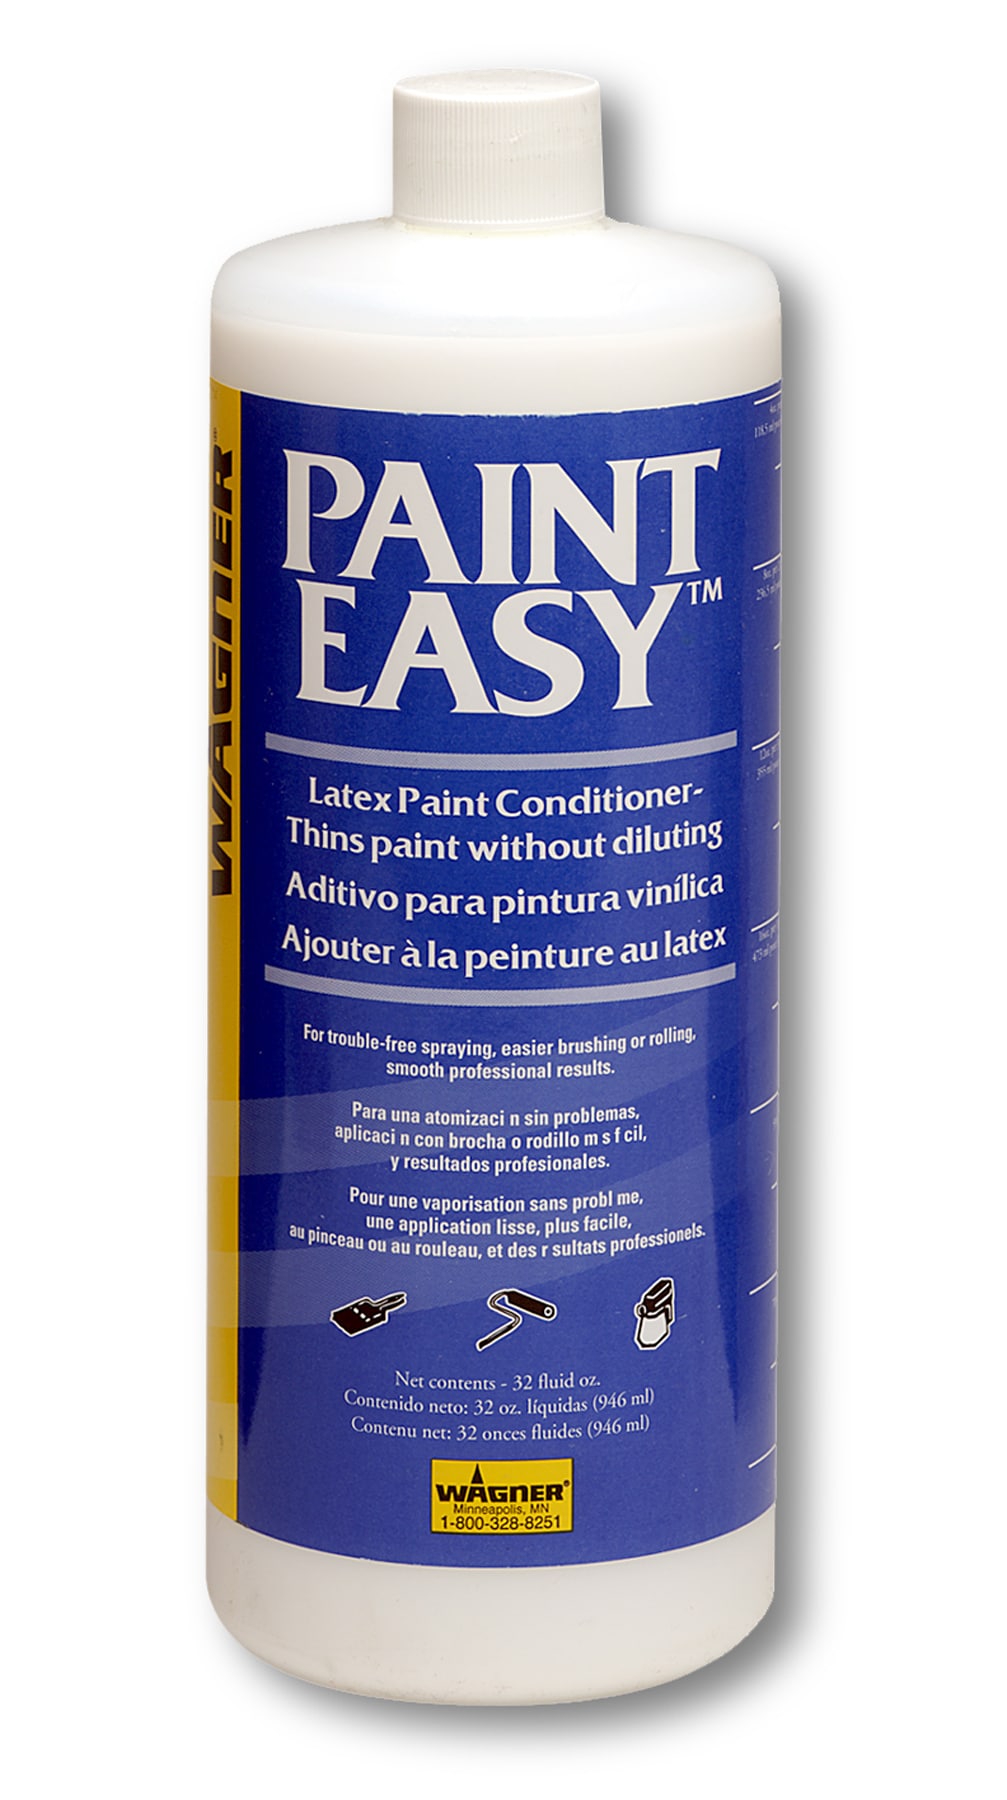 Waste Away Paint Hardener, 12 pack - Household Paint Solvents